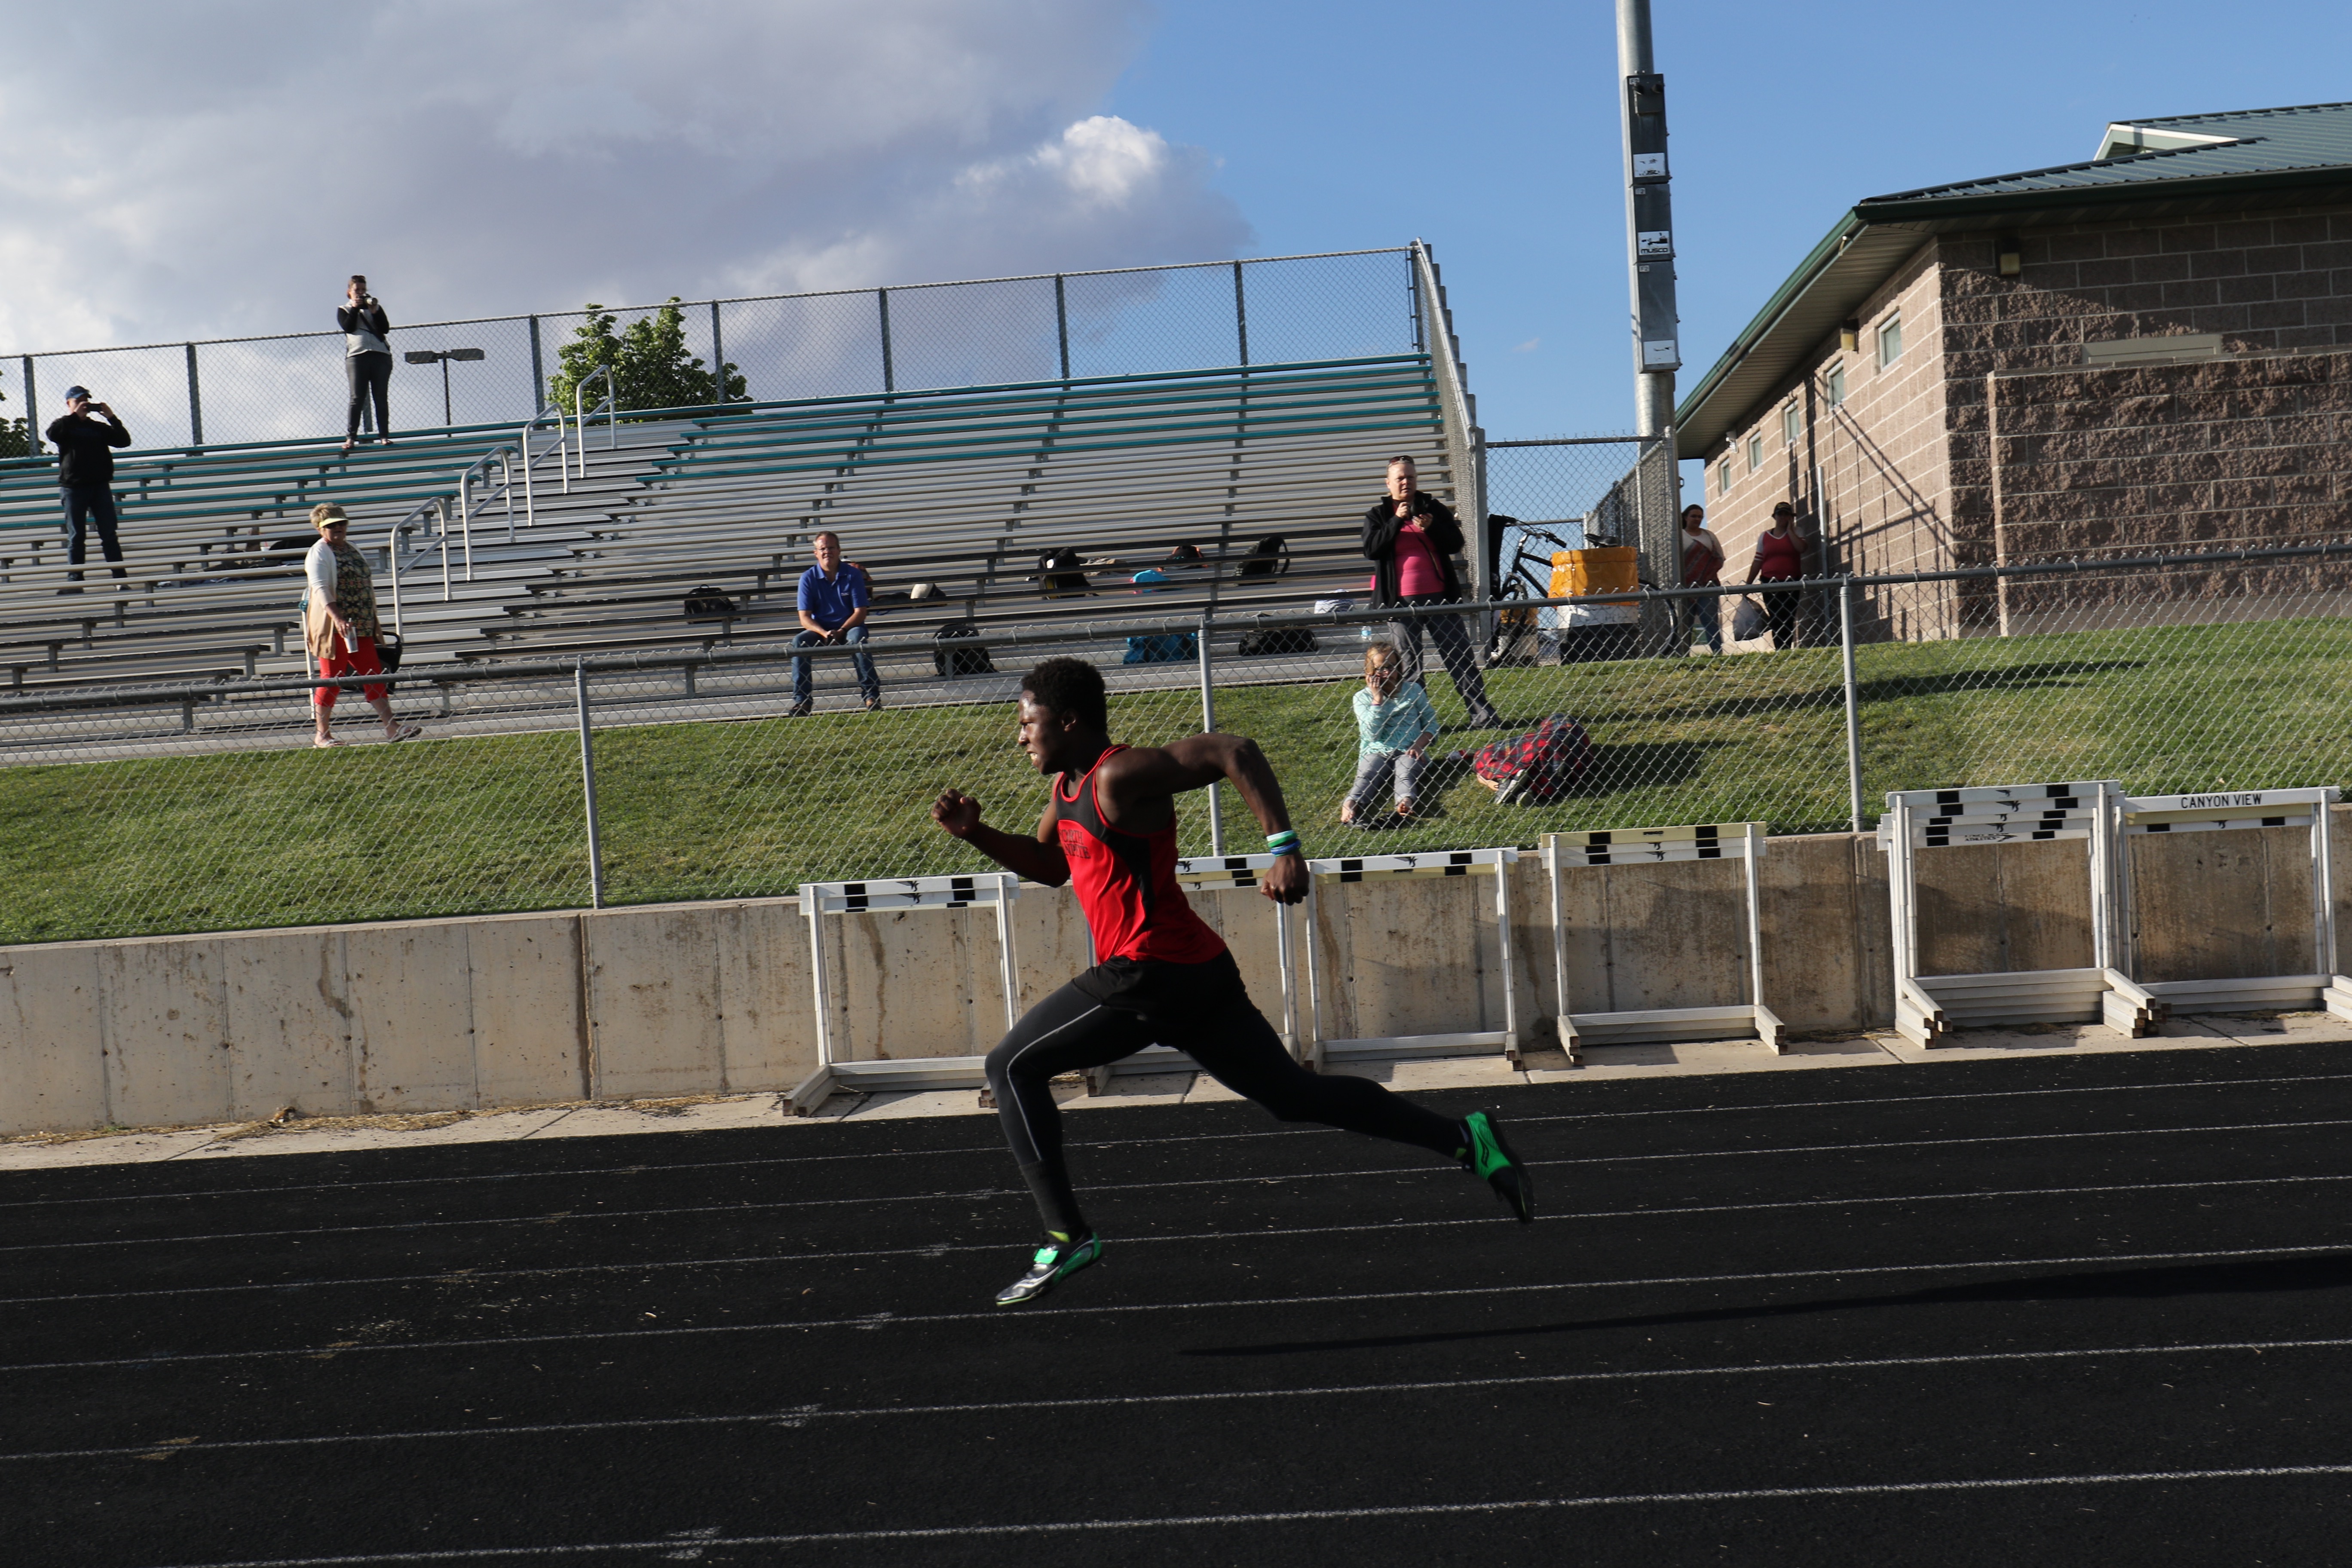 Track performs well at region, prepares for state